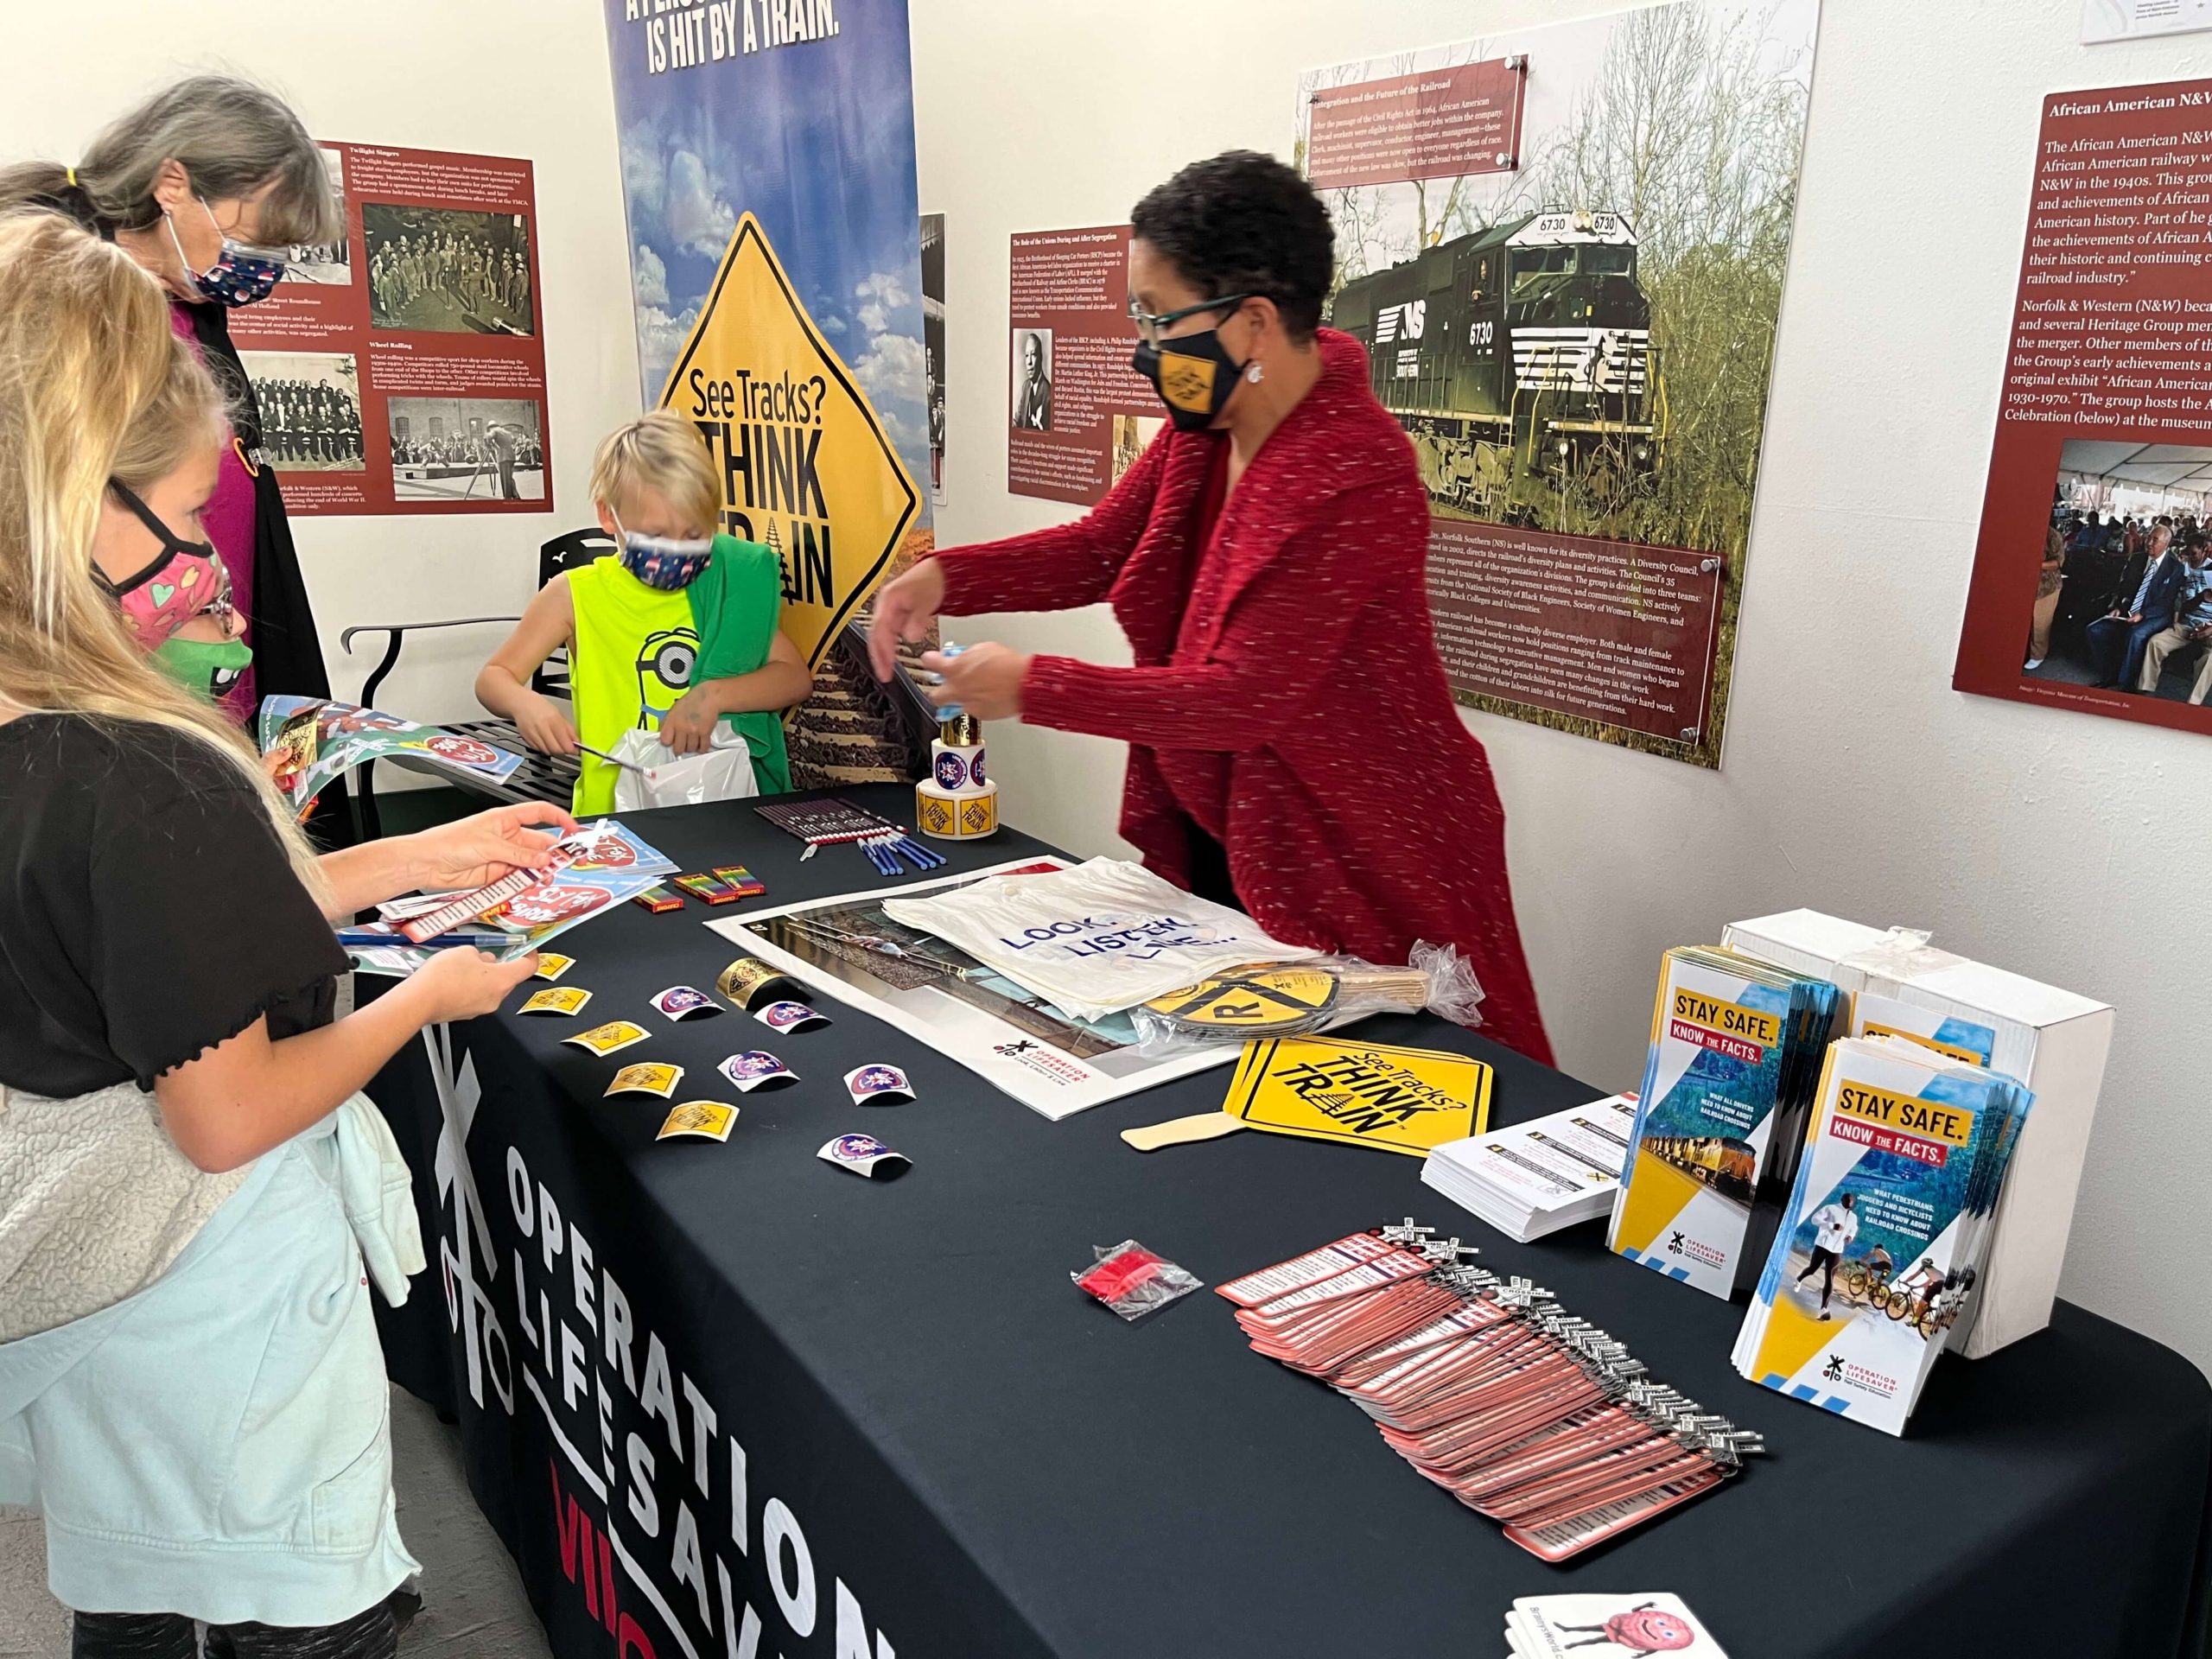 the Virginia Museum of Transportation gave out free literature, stickers, and coloring books to teach youngsters about train crossing safety